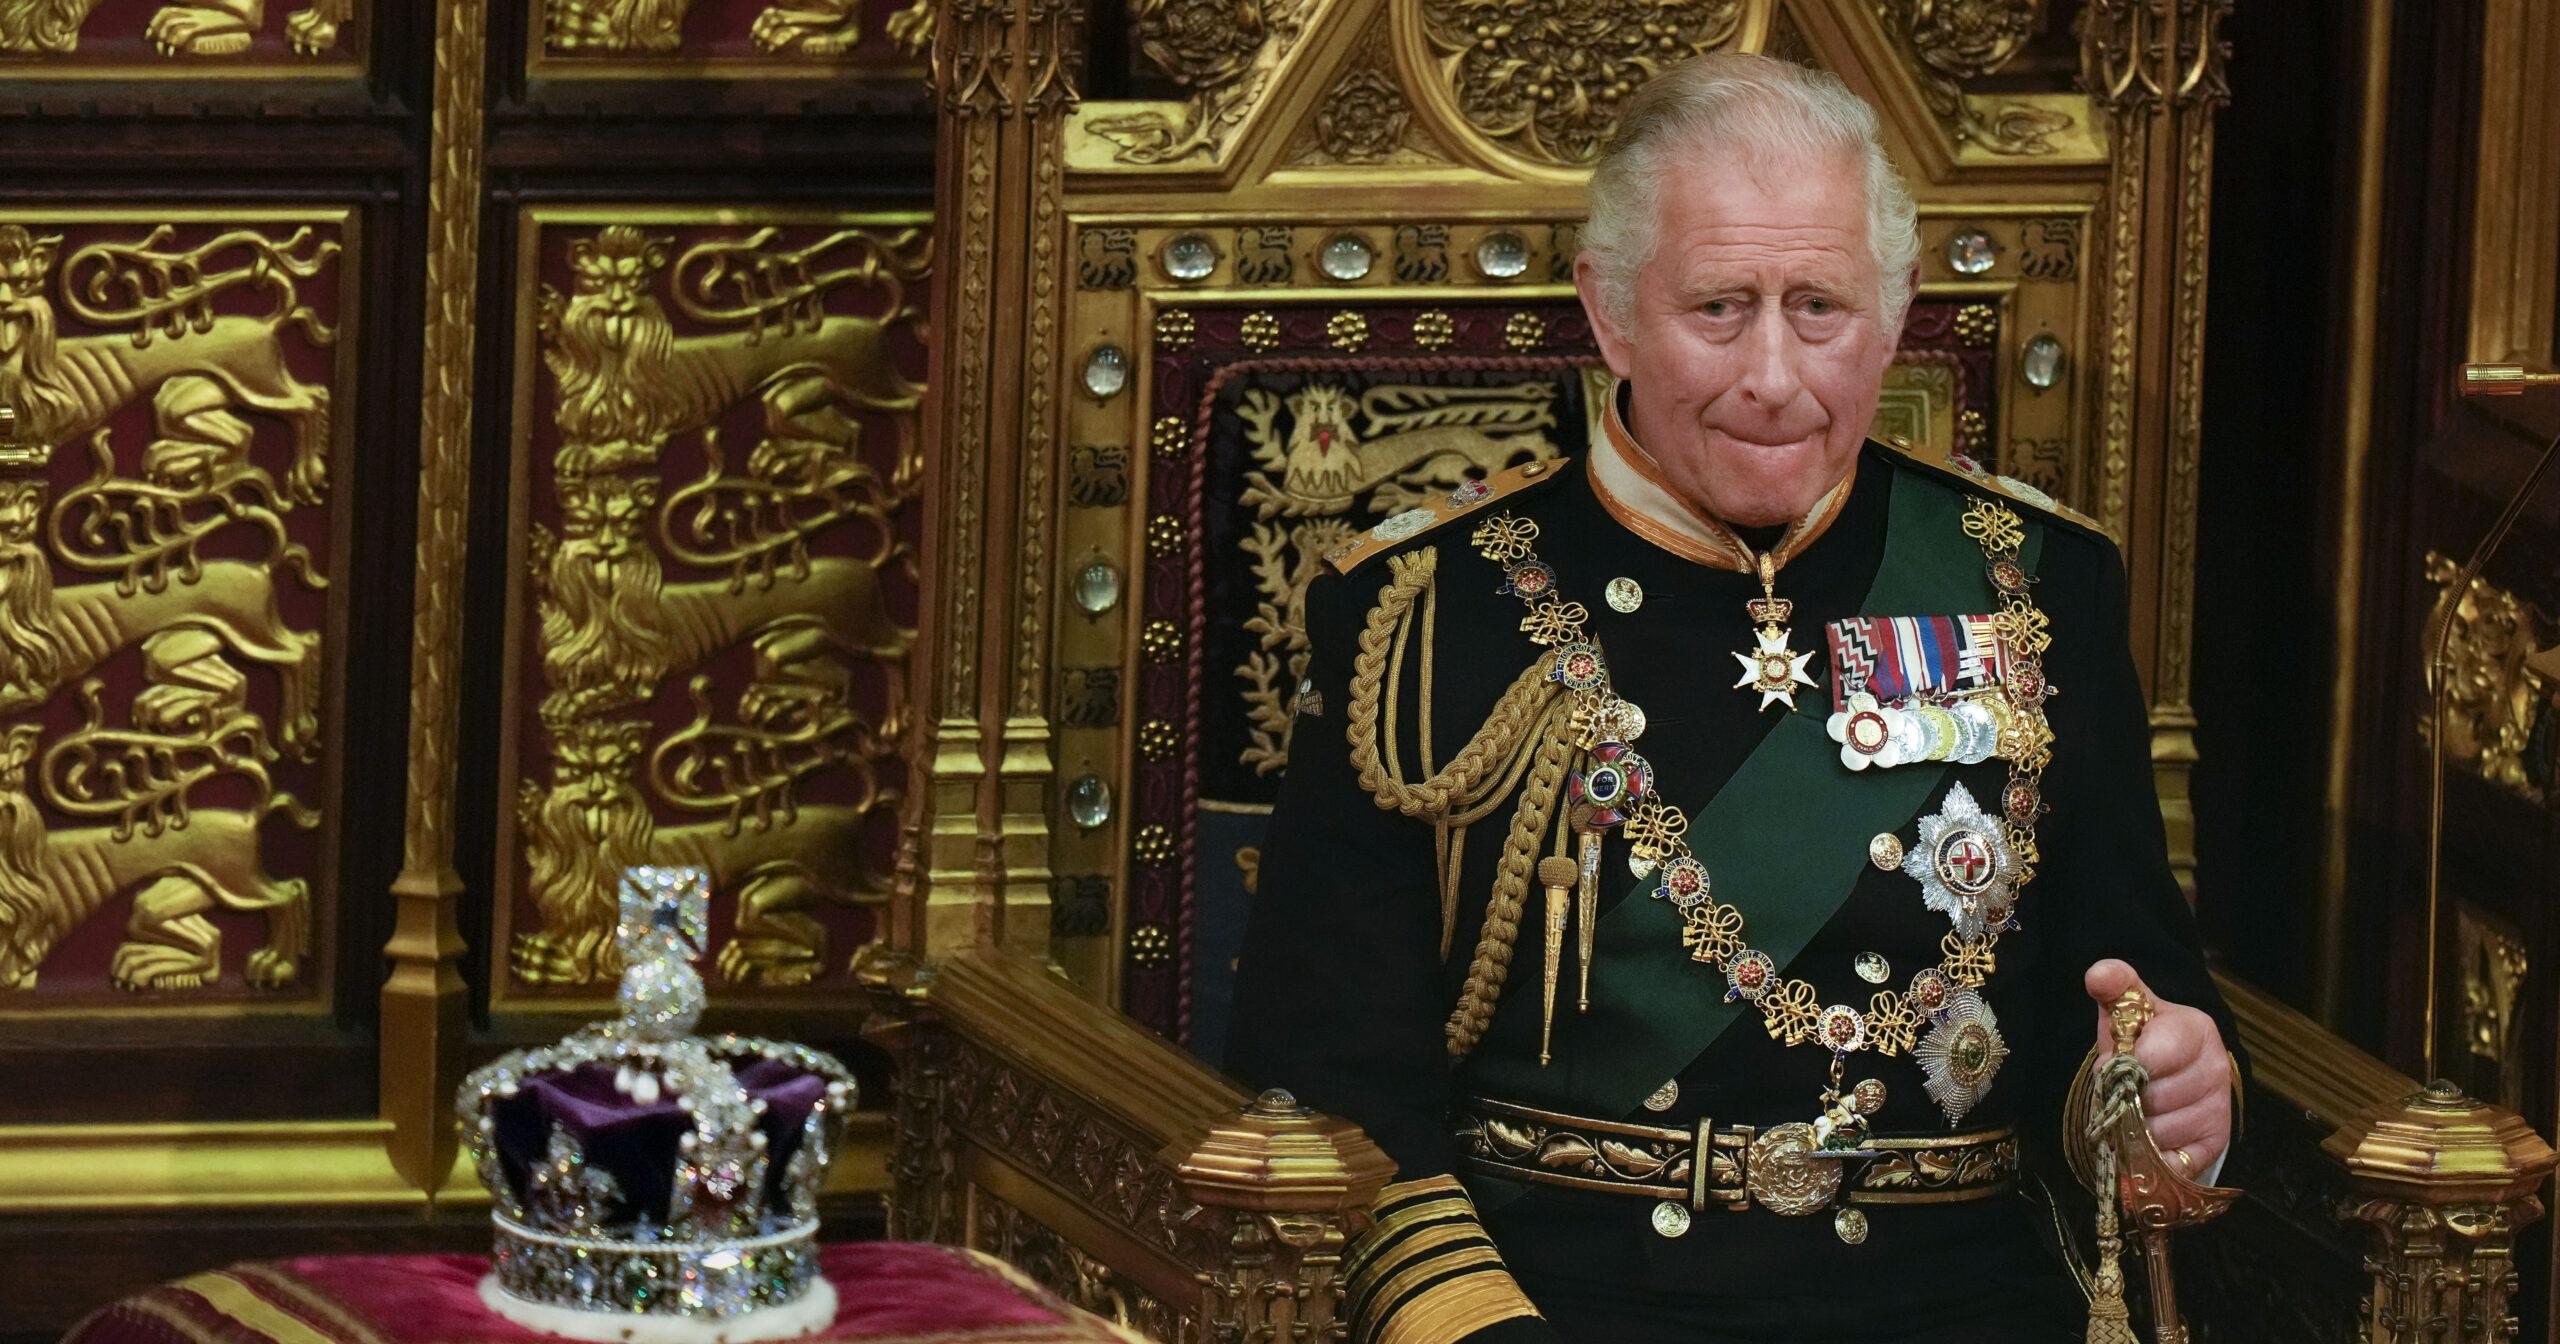 FILE - Prince Charles is seated next to the Queen's crown during the State Opening of Parliament, at the Palace of Westminster in London, May 10, 2022. Queen Elizabeth II did not attend the opening of Parliament amid ongoing mobility issues. Prince Charles has been preparing for the crown his entire life. Now, that moment has finally arrived. Charles, the oldest person to ever assume the British throne, became king on Thursday Sept. 8, 2022, following the death of his mother, Queen Elizabeth II. (AP Photo/Alastair Grant, Pool, File)